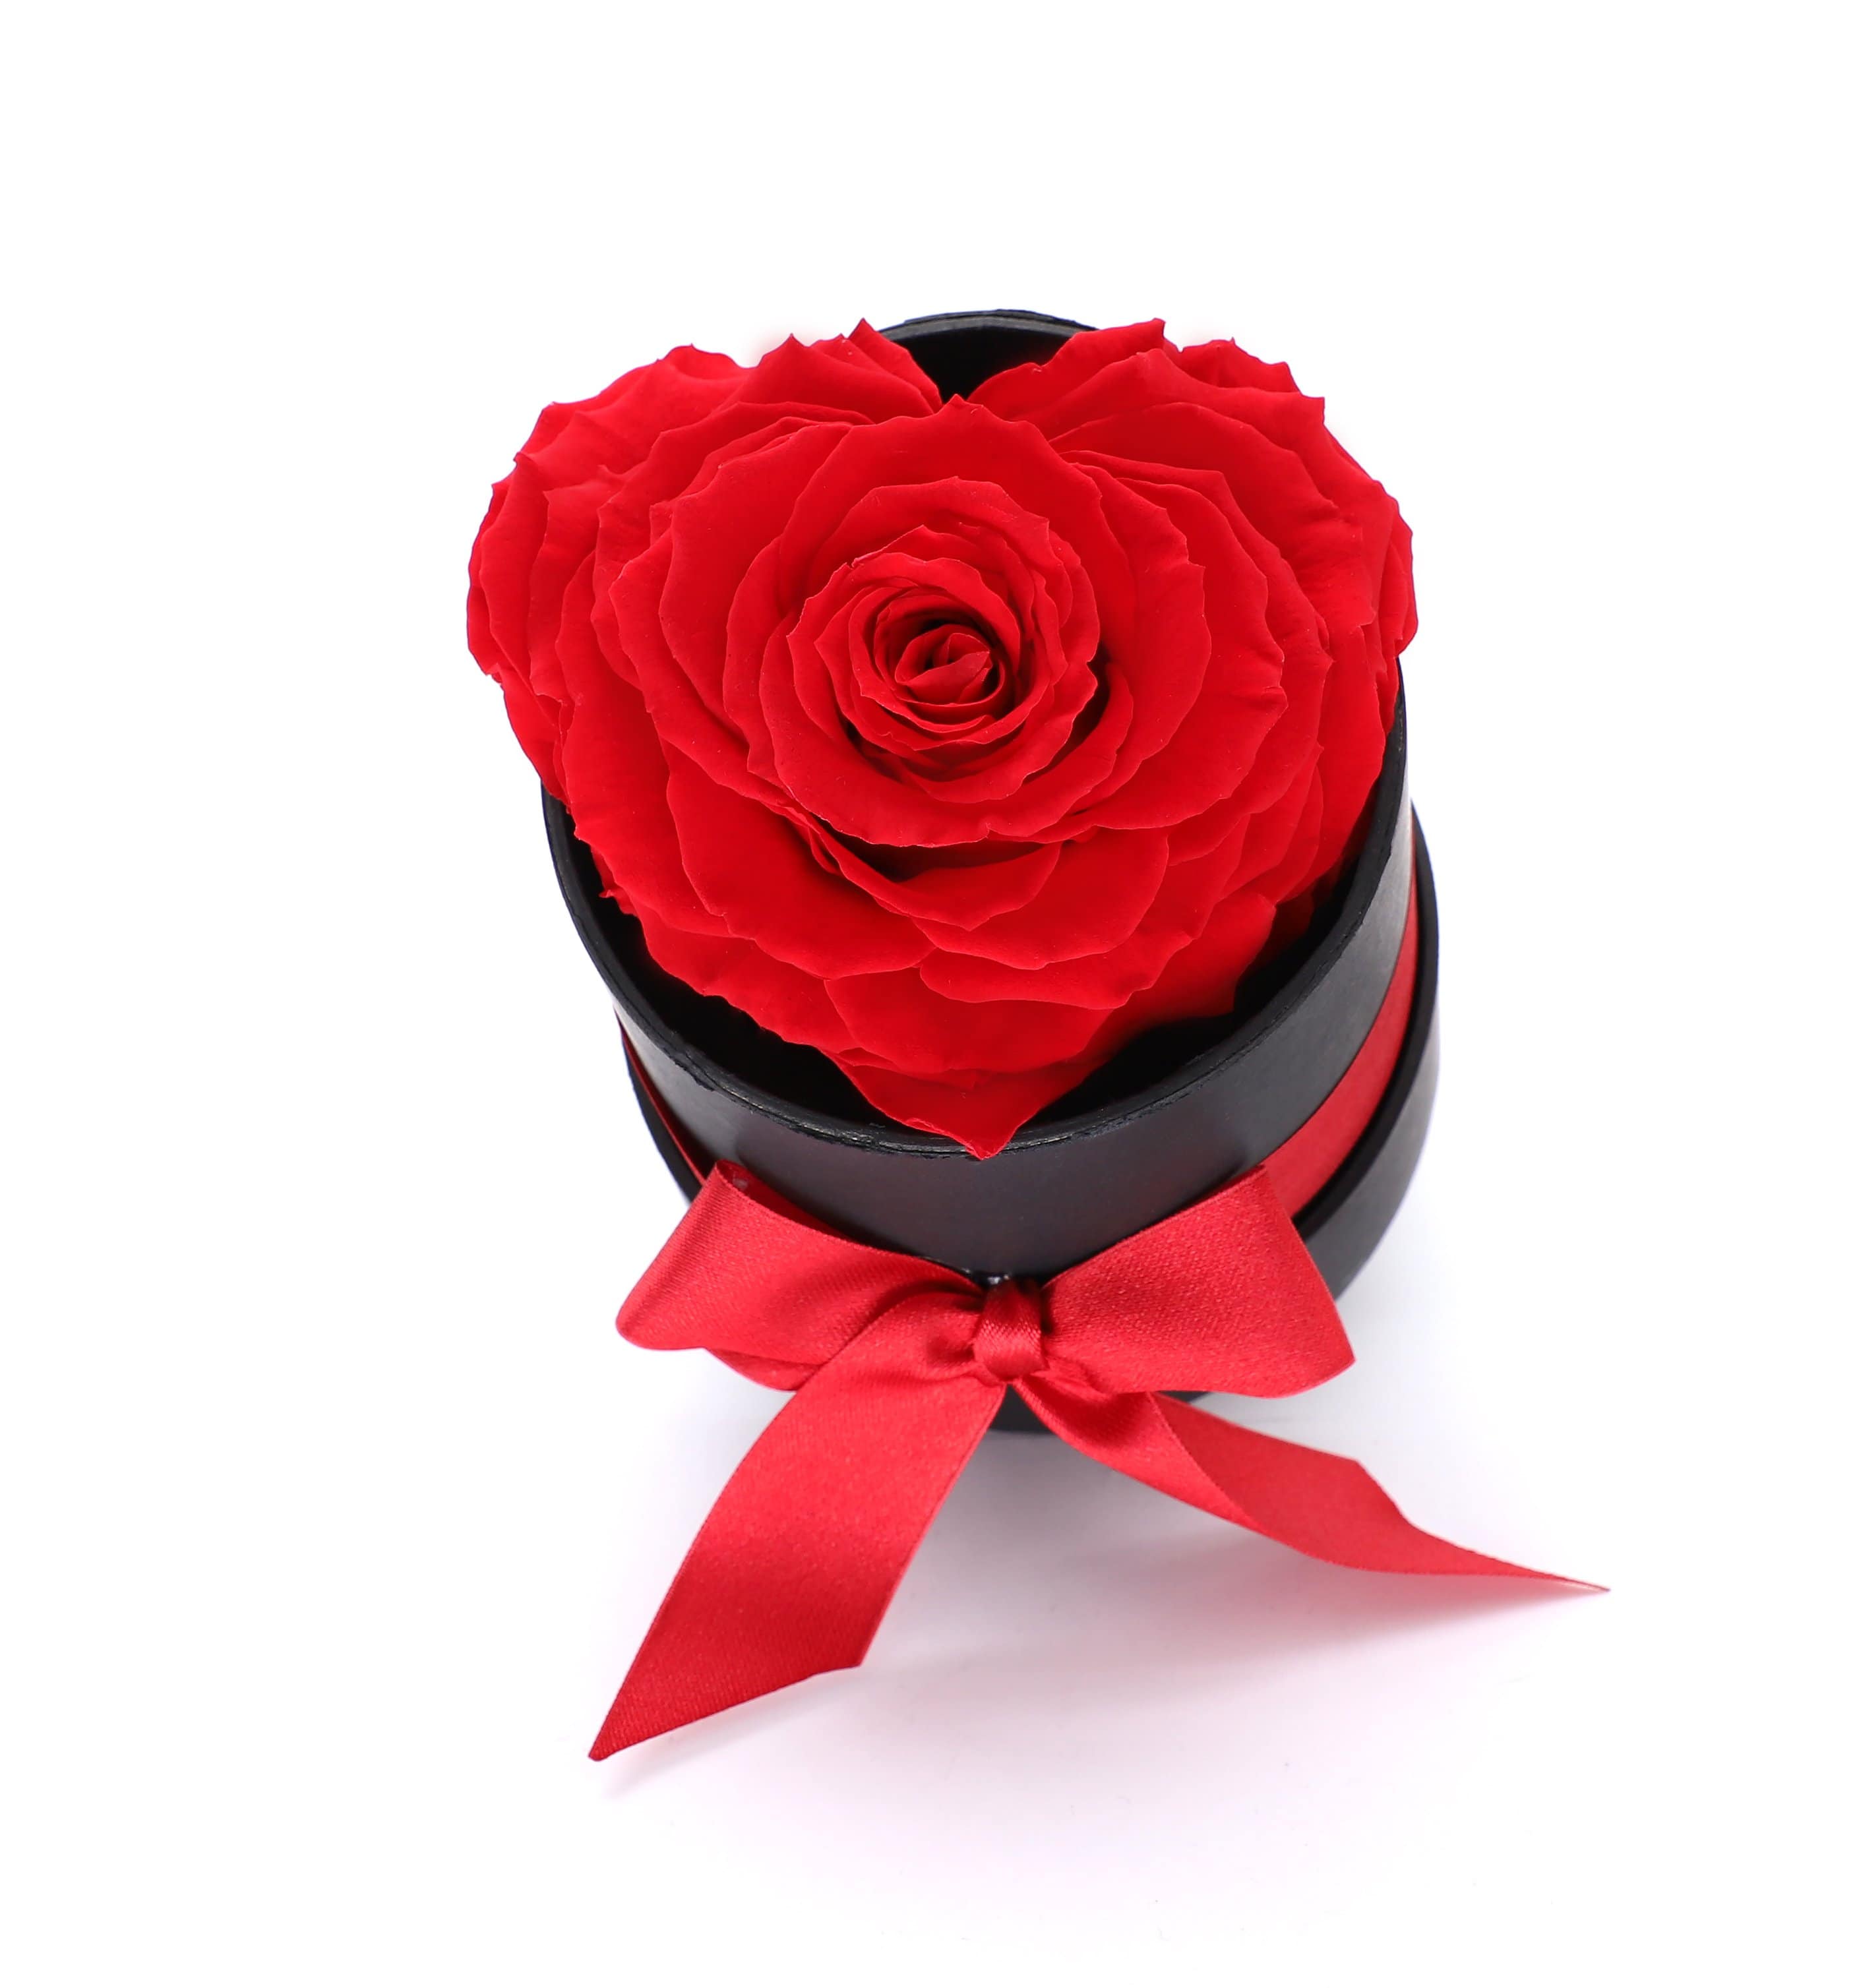 Red Heart Shape Forever Rose in A Box- Black Gift Box - Le Jardin Infini Roses in a Box